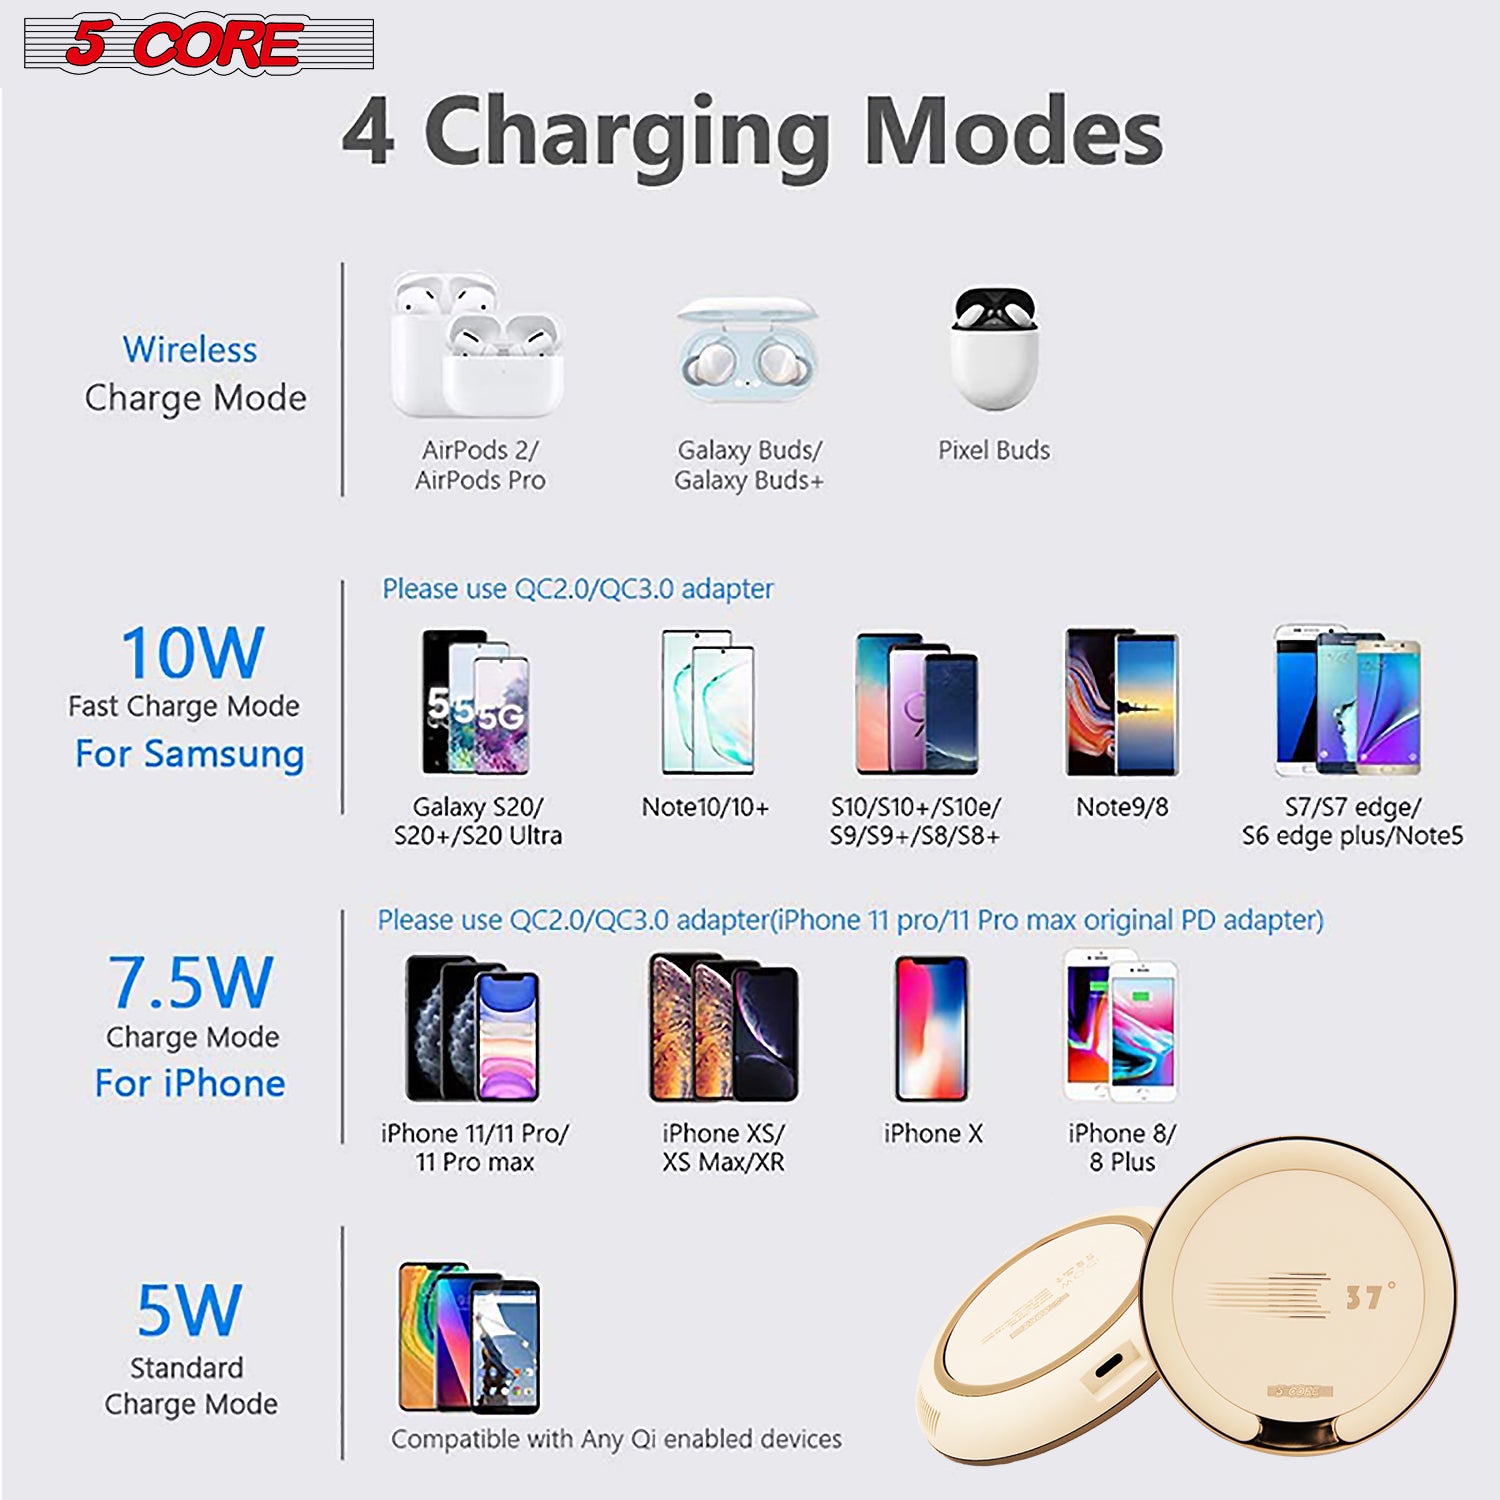 5Core Fast Wireless Charger Qi Certified 15W Wireless Charging Stand w Sleep-Friendly Light